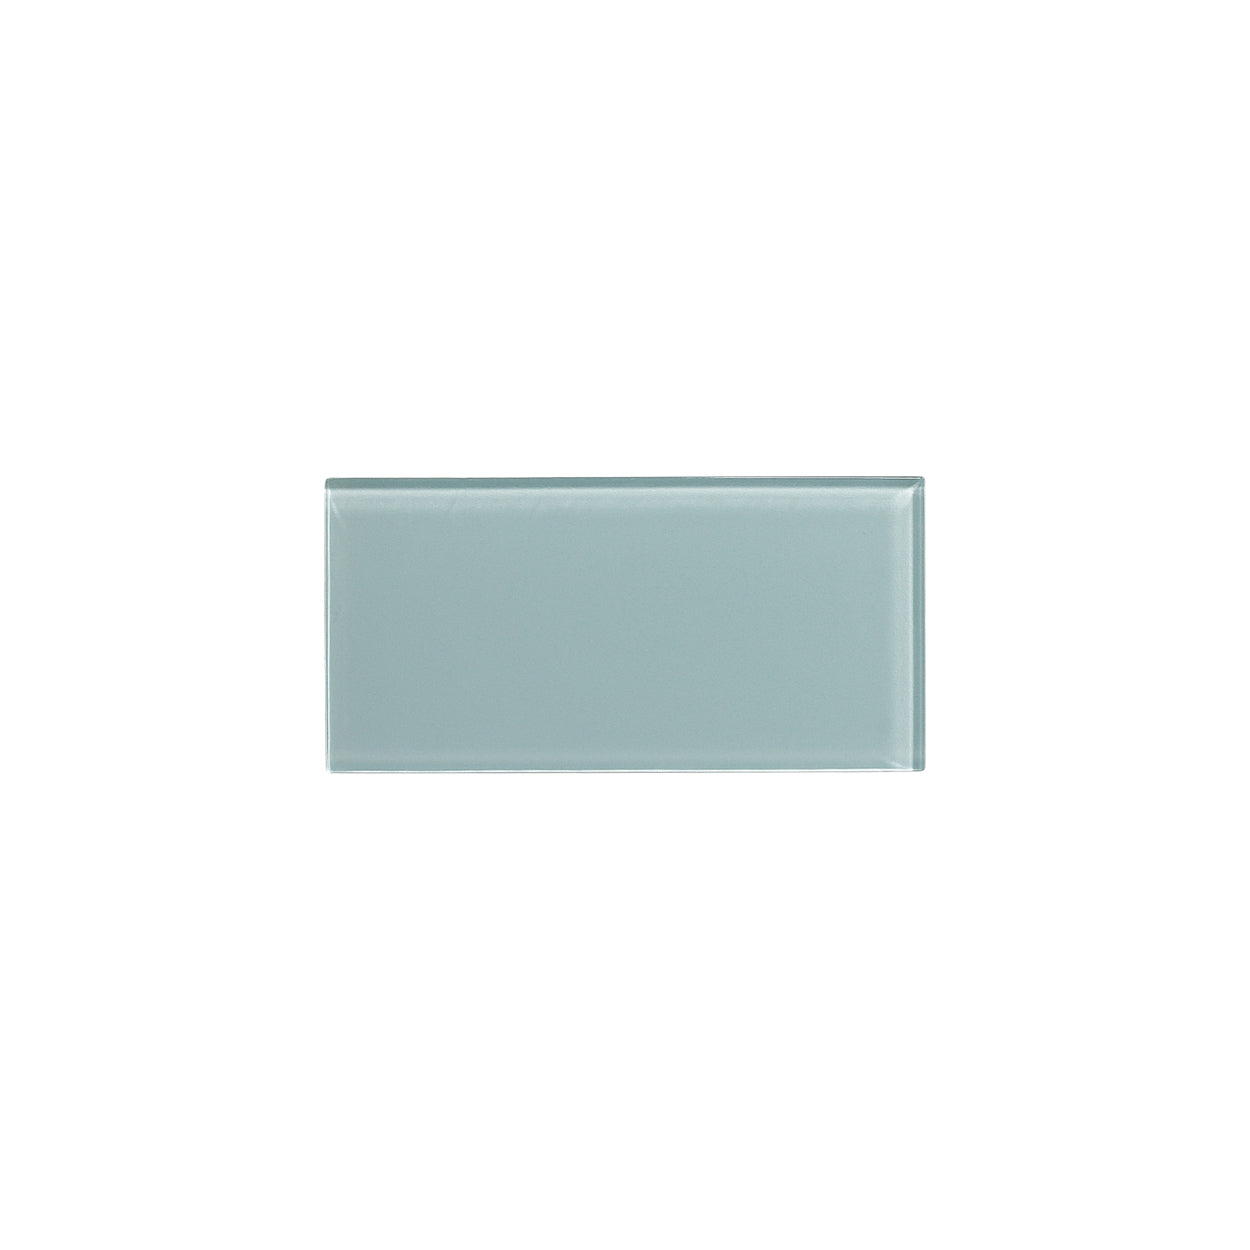 Lungarno - Urban Textures Contempo 3 in. x 6 in. Wall Tile - Sky Blue